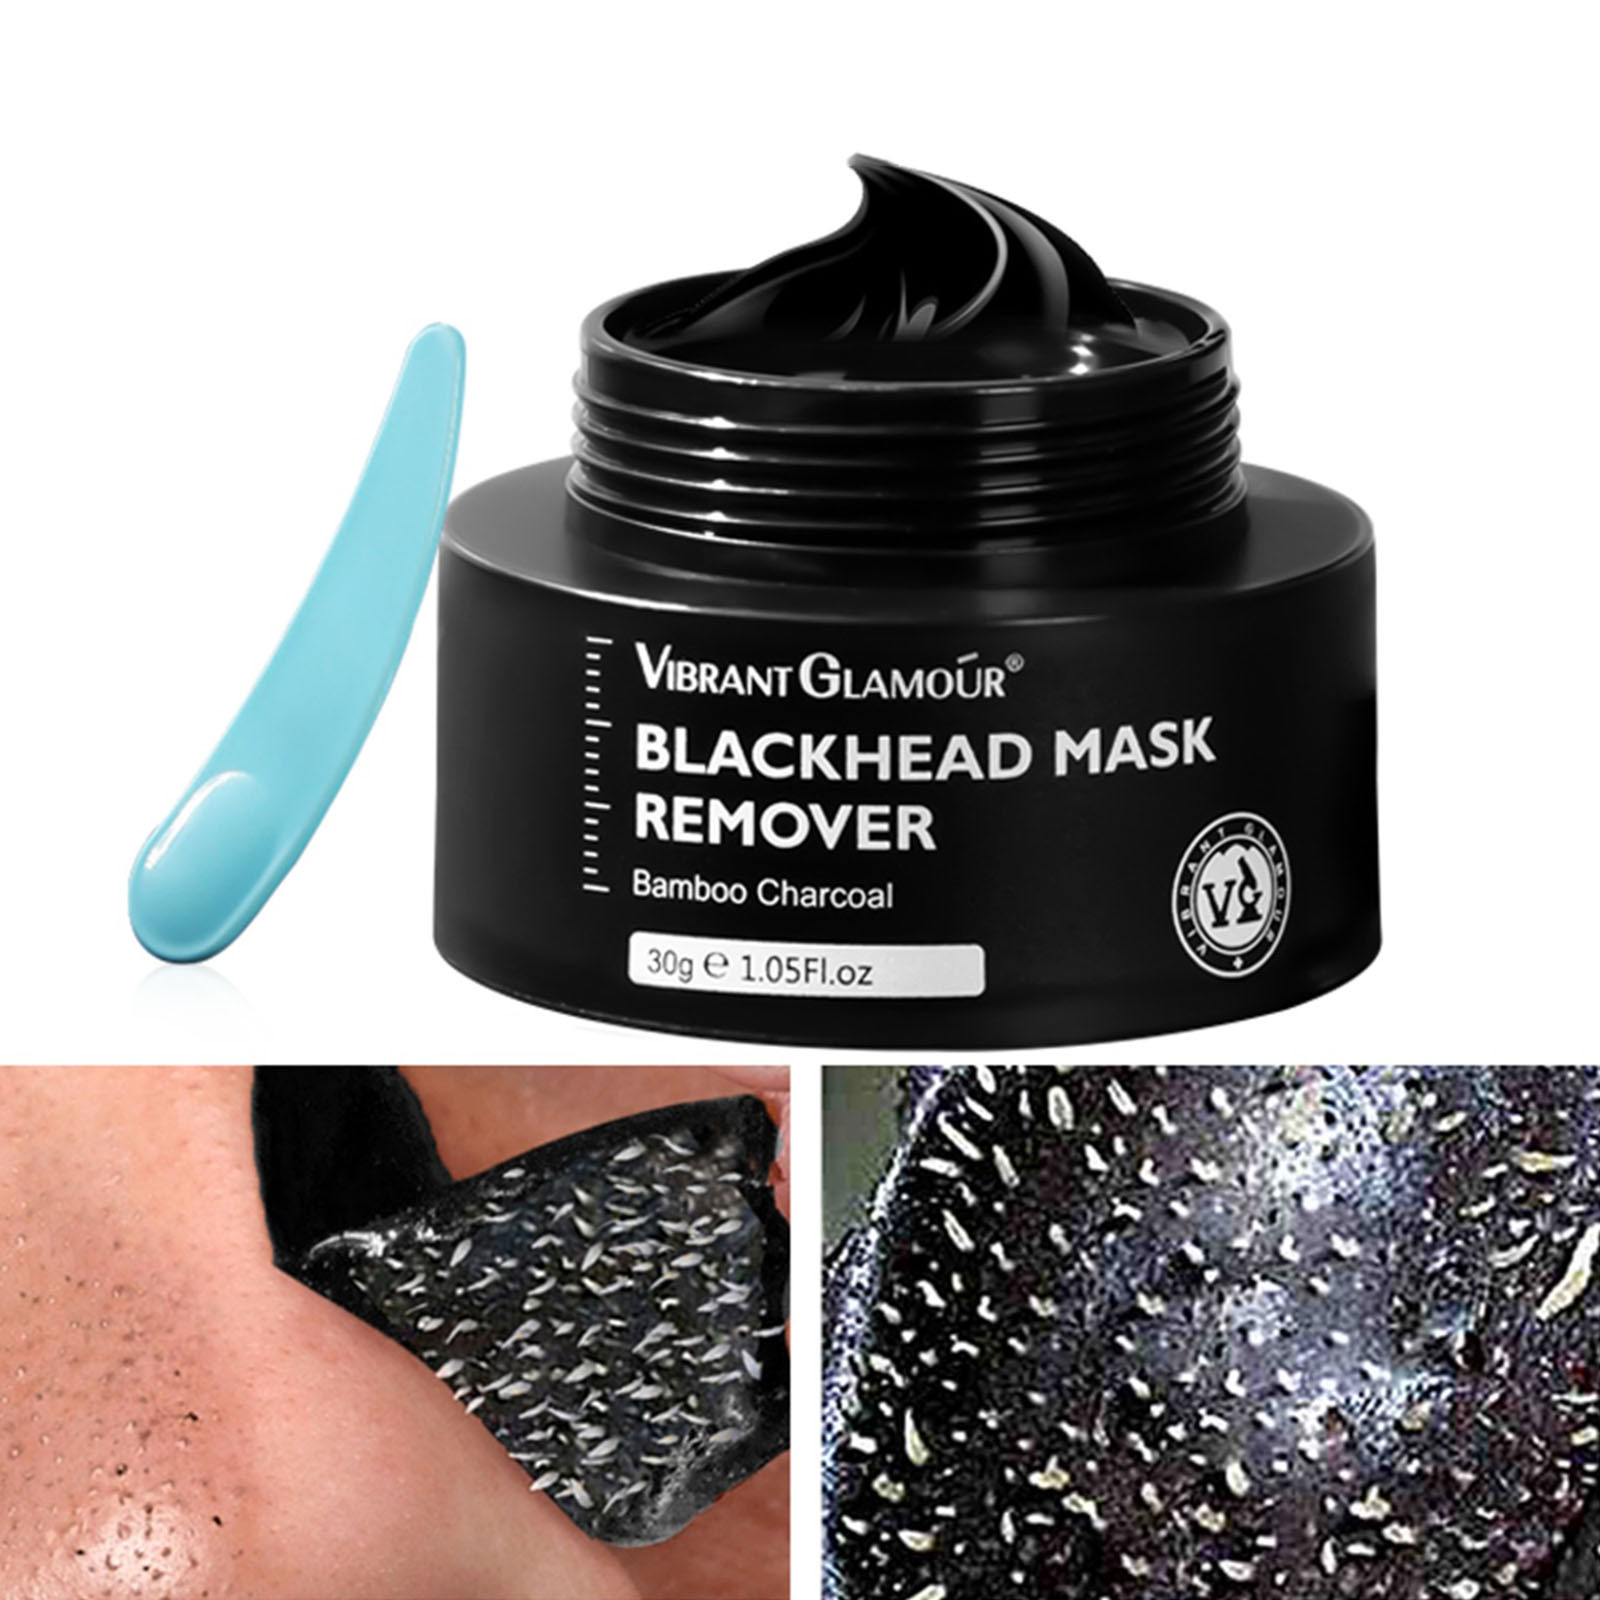 TIHLMK Sales Clearance Bamboo Charcoal Blackhead Peeling Nose Patch To Clean Pores - image 5 of 6